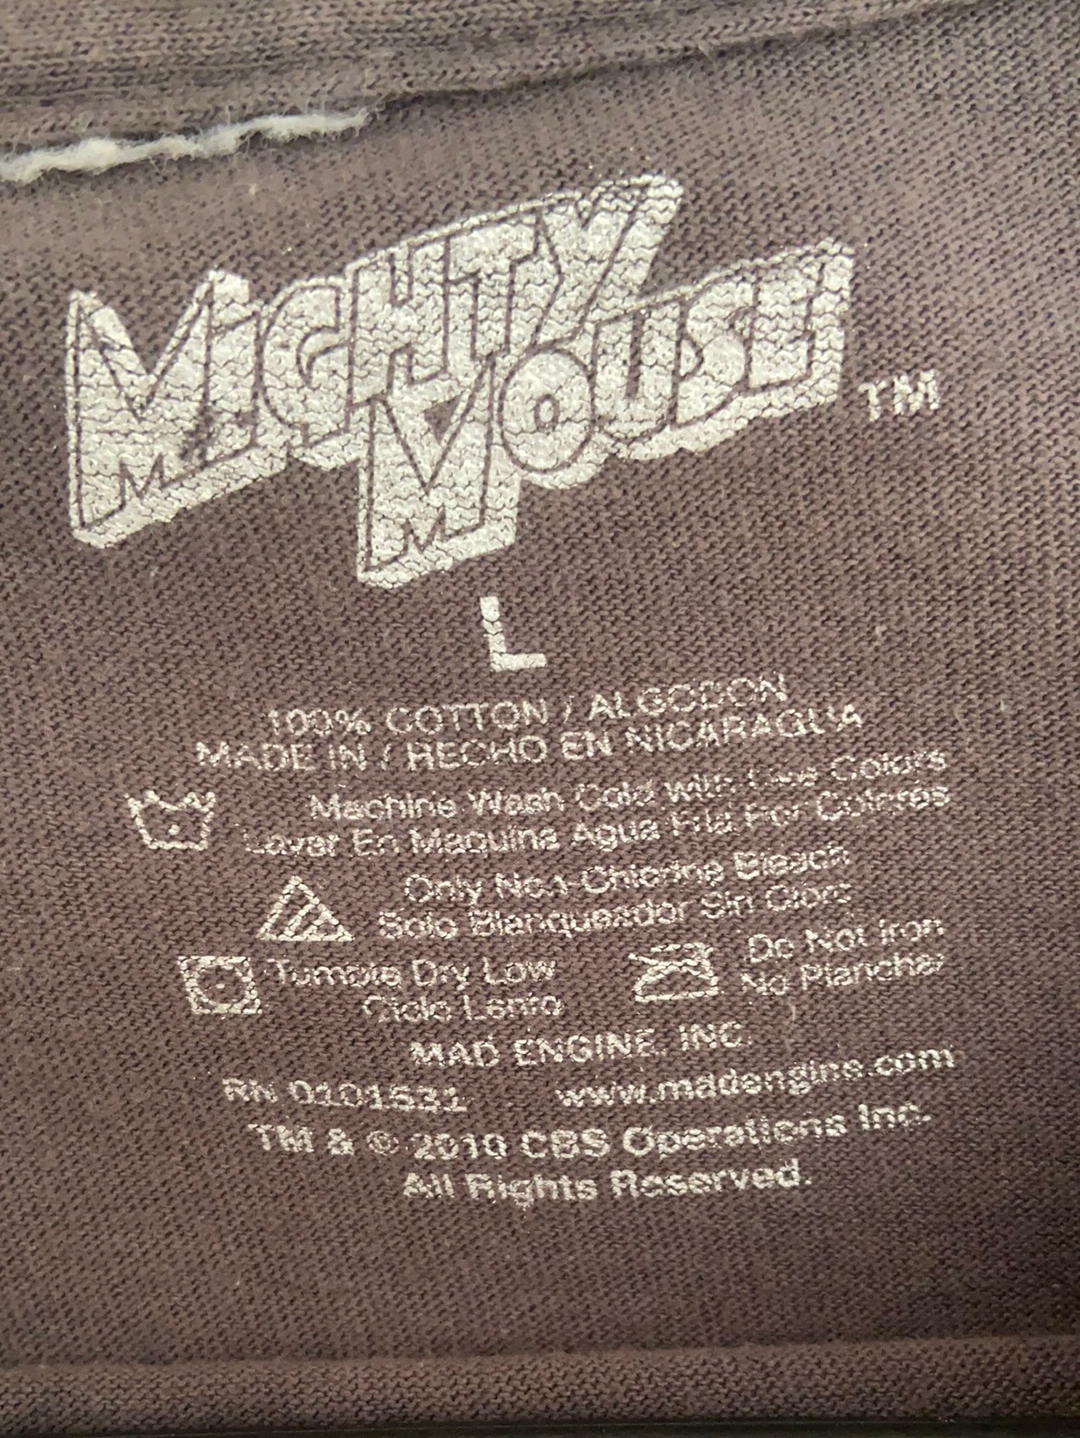 Mighty Mouse Vintage Tee - Large